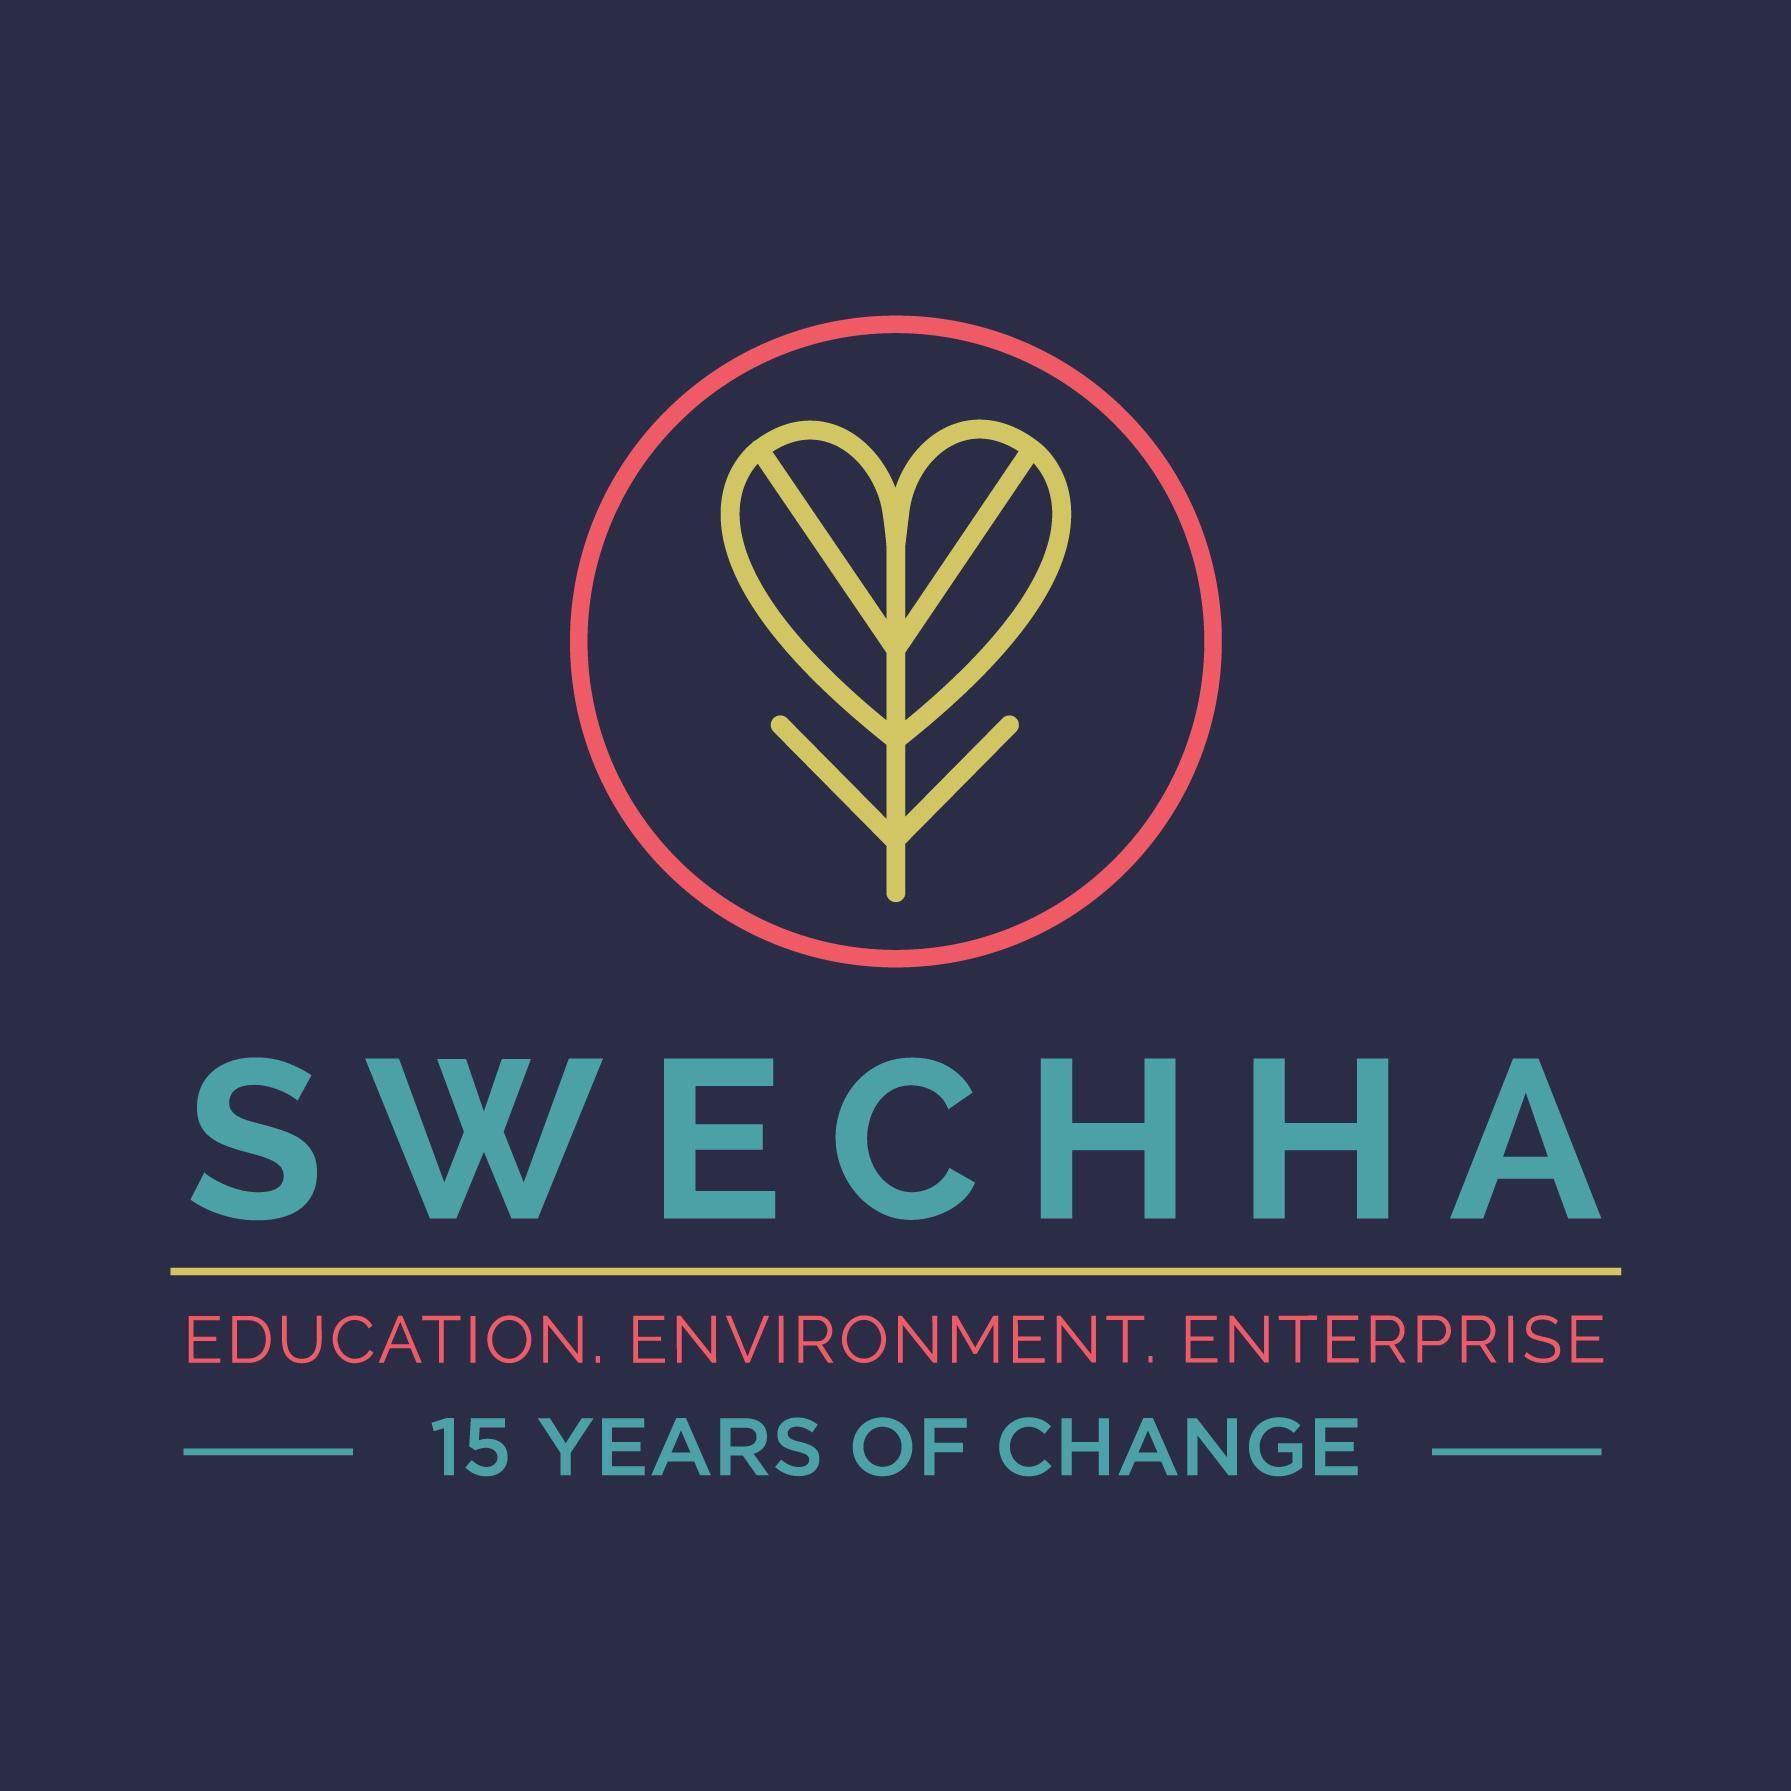 Swechha is a youth-run, youth-focused NGO based in Delhi. We are engaged in environmental, social development and active citizenship issues.